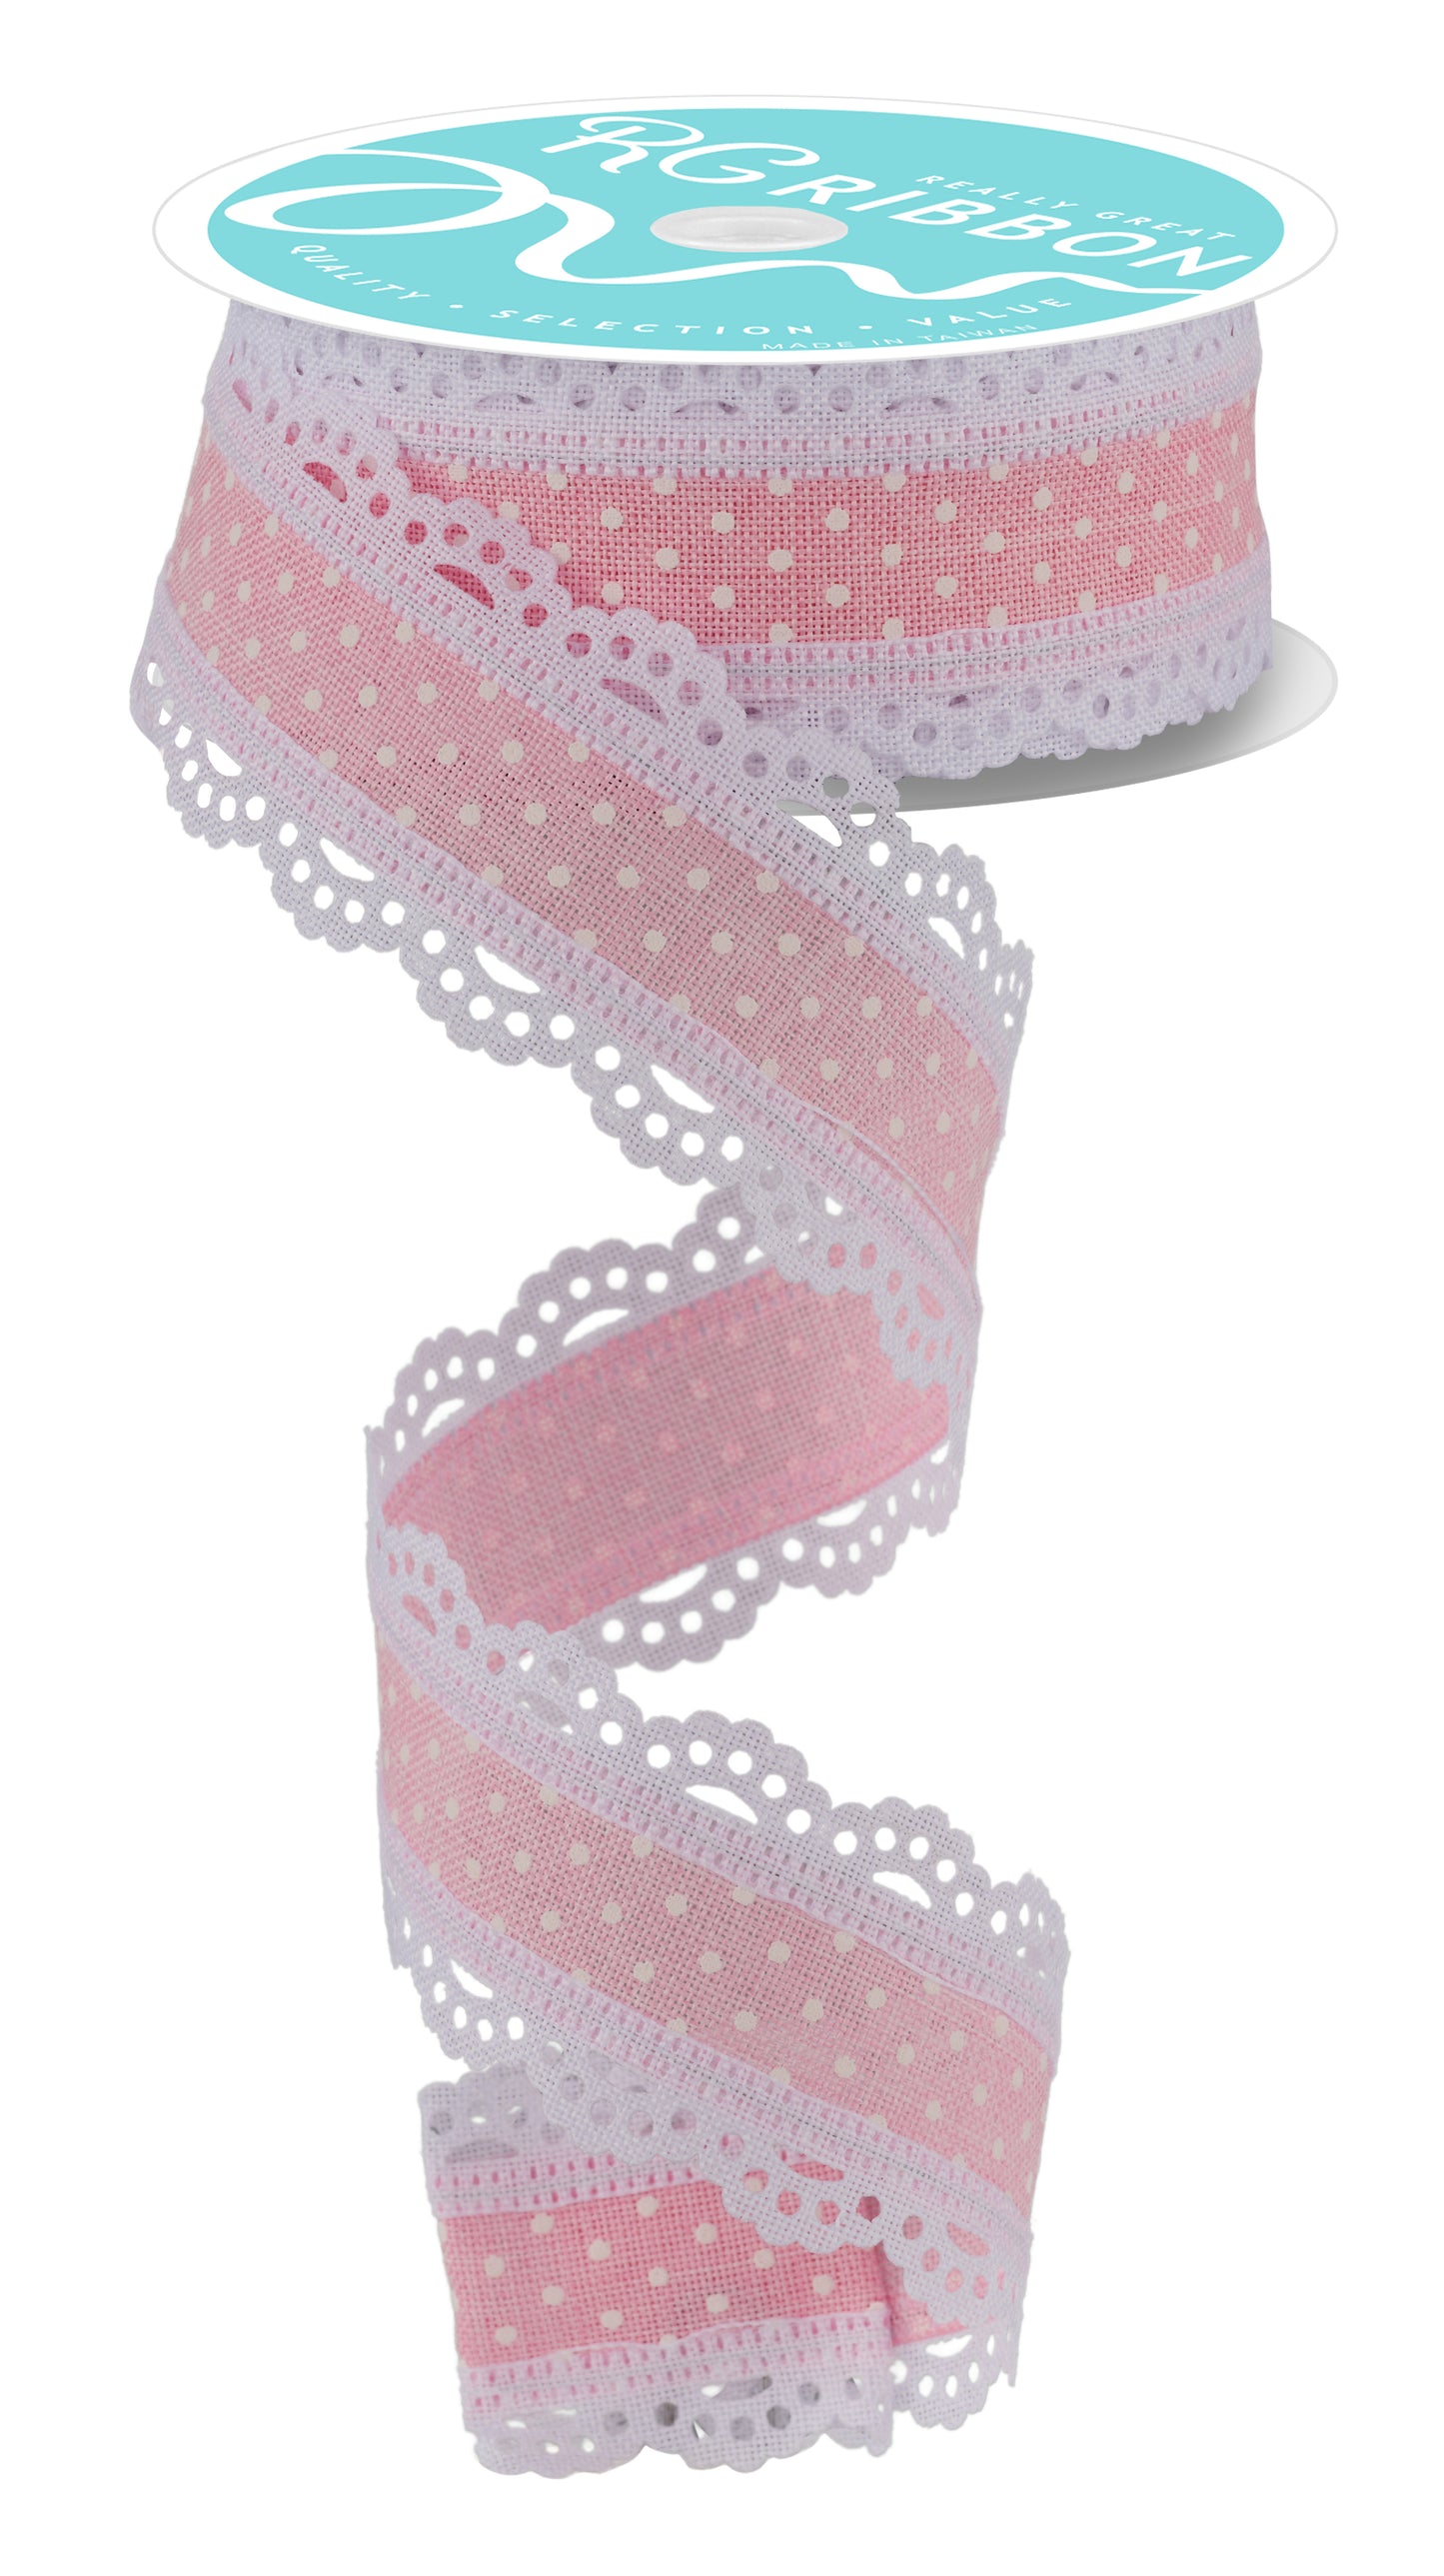 Wired Ribbon * Swiss Dot with Scalloped Edge * Light Pink and White Canvas * 1.5" x 10 Yards * RG0886915